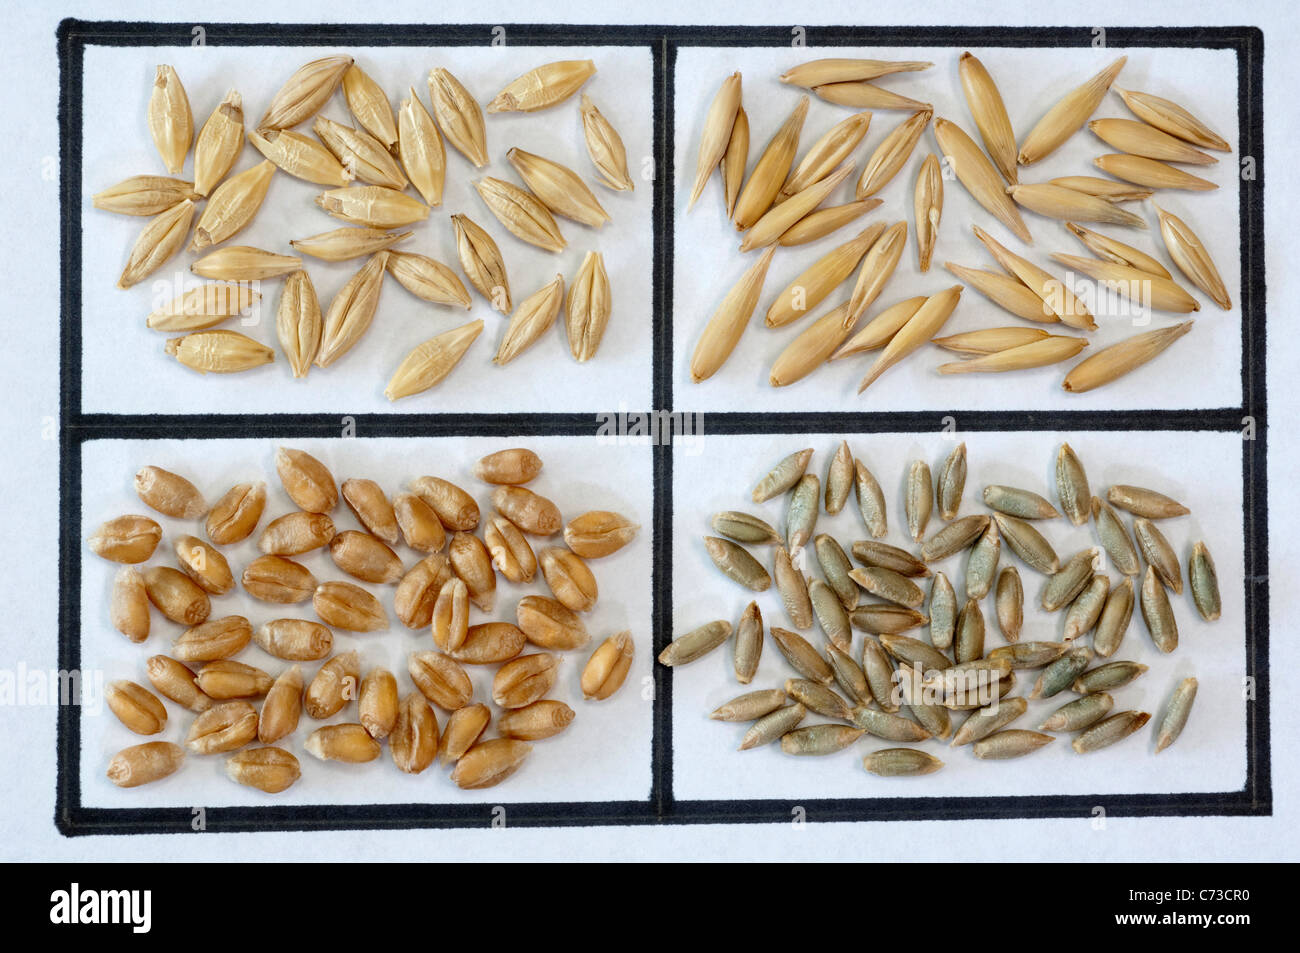 Various cereals: Barley (Hordeum distichon), Oats (Avena sativa), Wheat (Triticum aestivum) and Rye (Secale cereale). Stock Photo